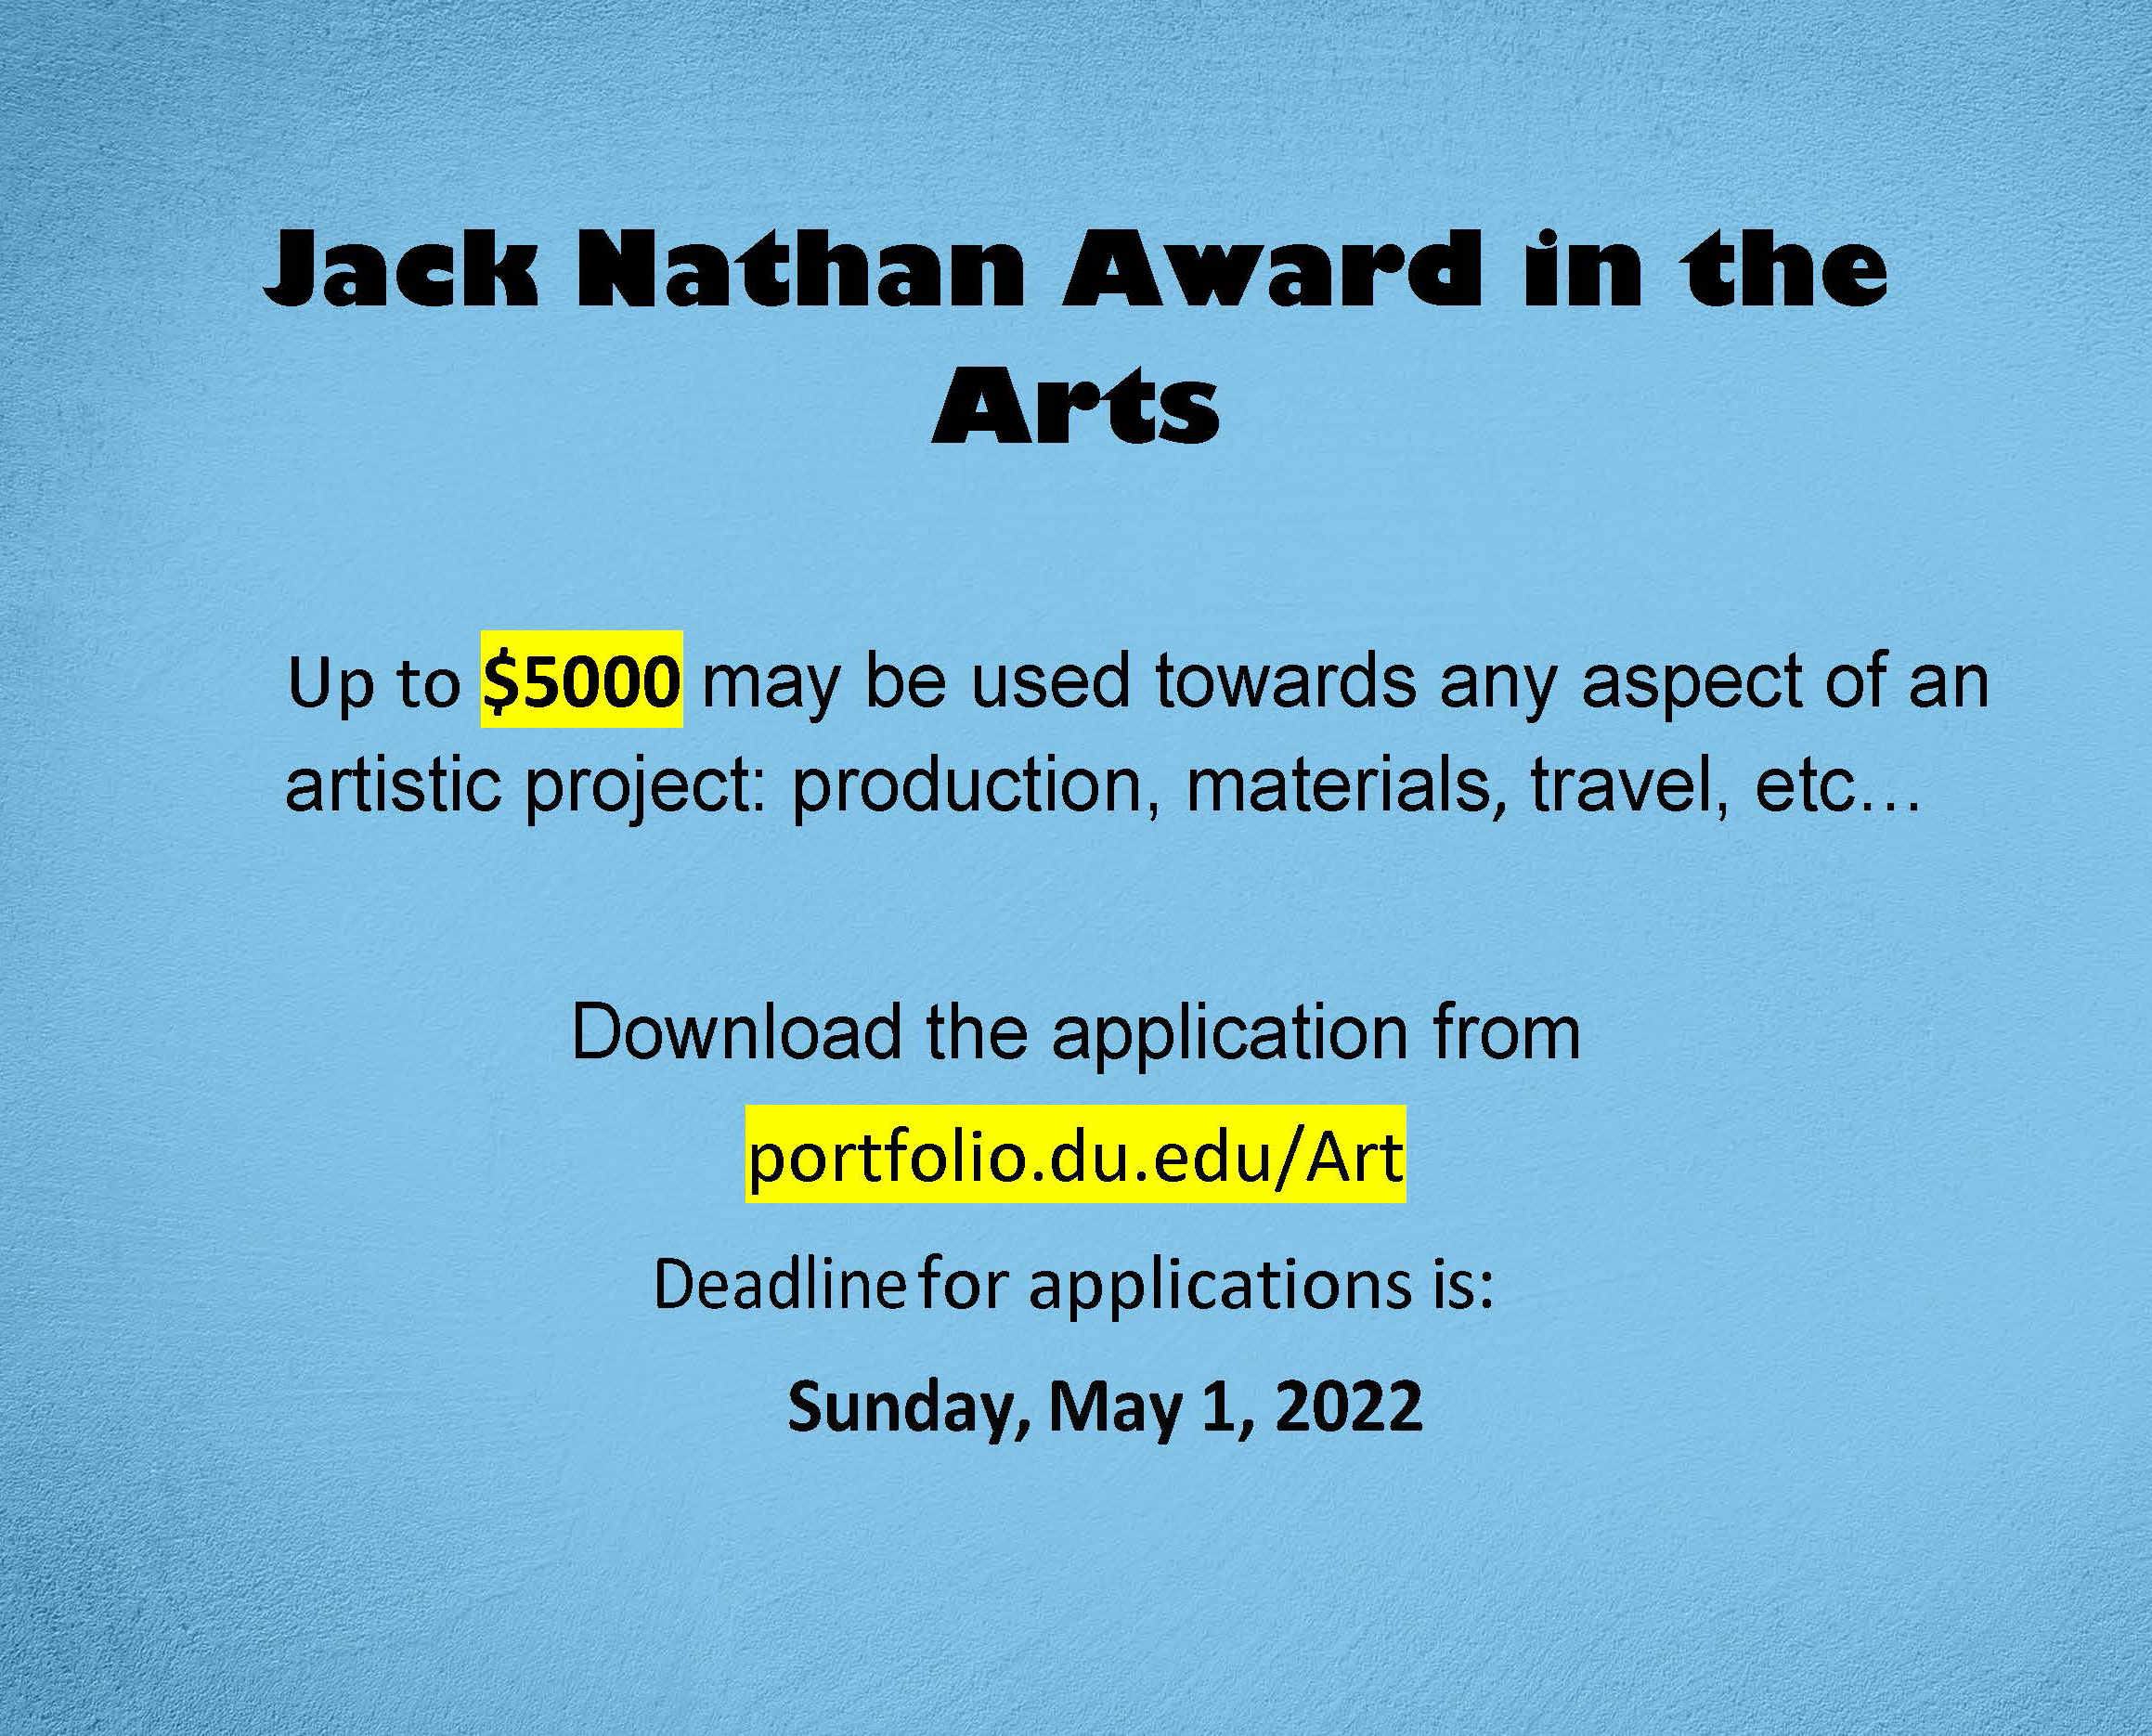 Jack Nathan Award in the Arts flyer